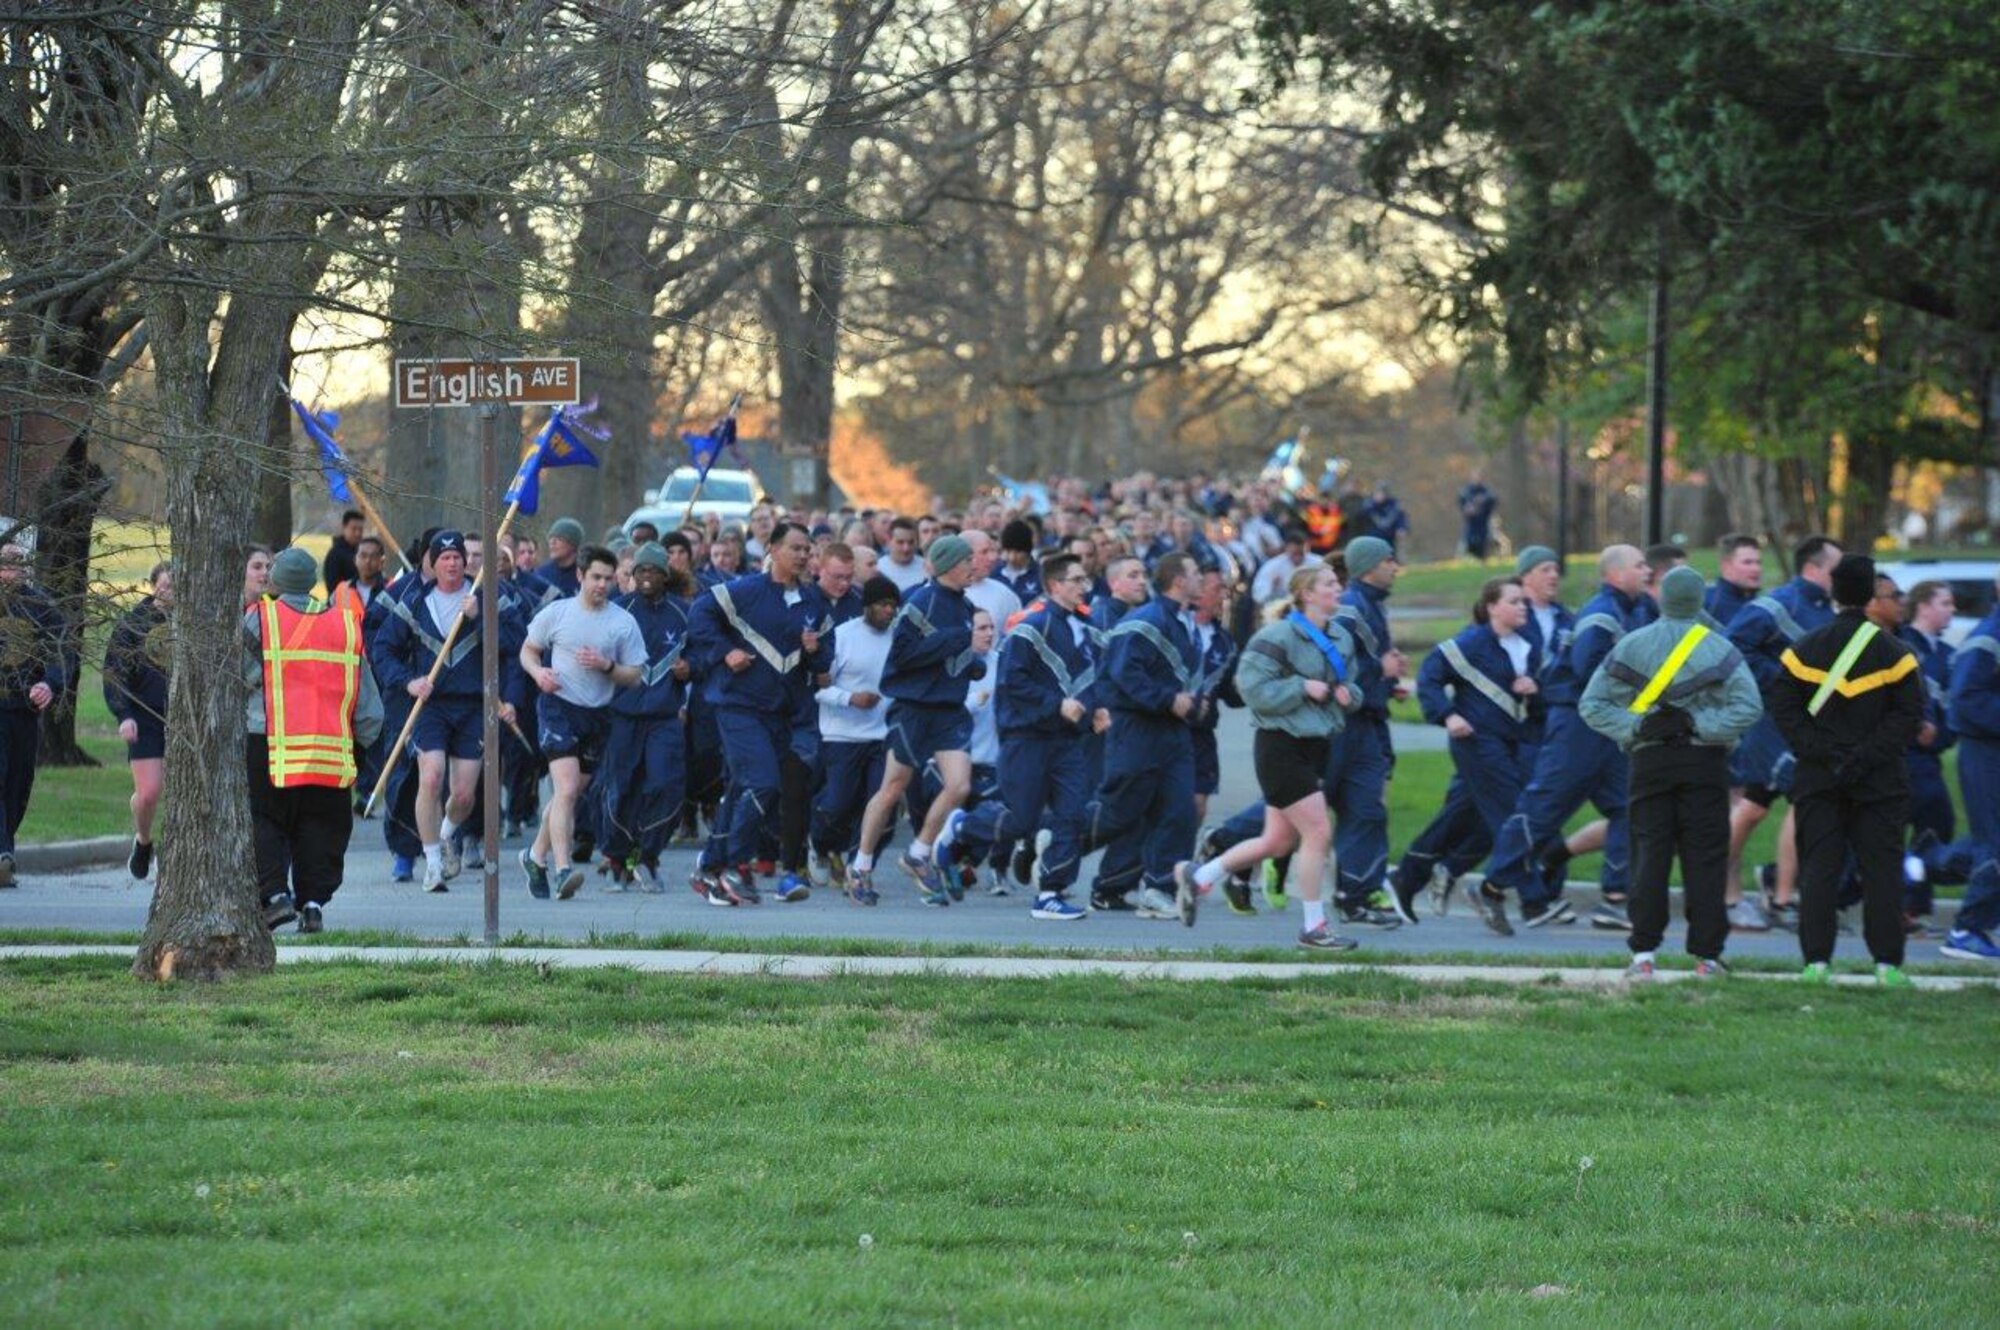 Airmen, Soldiers, Sailors, Marines and Coast Guard run in the 2016 Sexual Assault, Awareness and Prevention Month garrison run April 8, 2016 at Fort George G. Meade, Md. There were over 1,900 joint service members participating in the SAAPM event. (U.S. Air Force photo/Staff Sgt. Alexandre Montes)